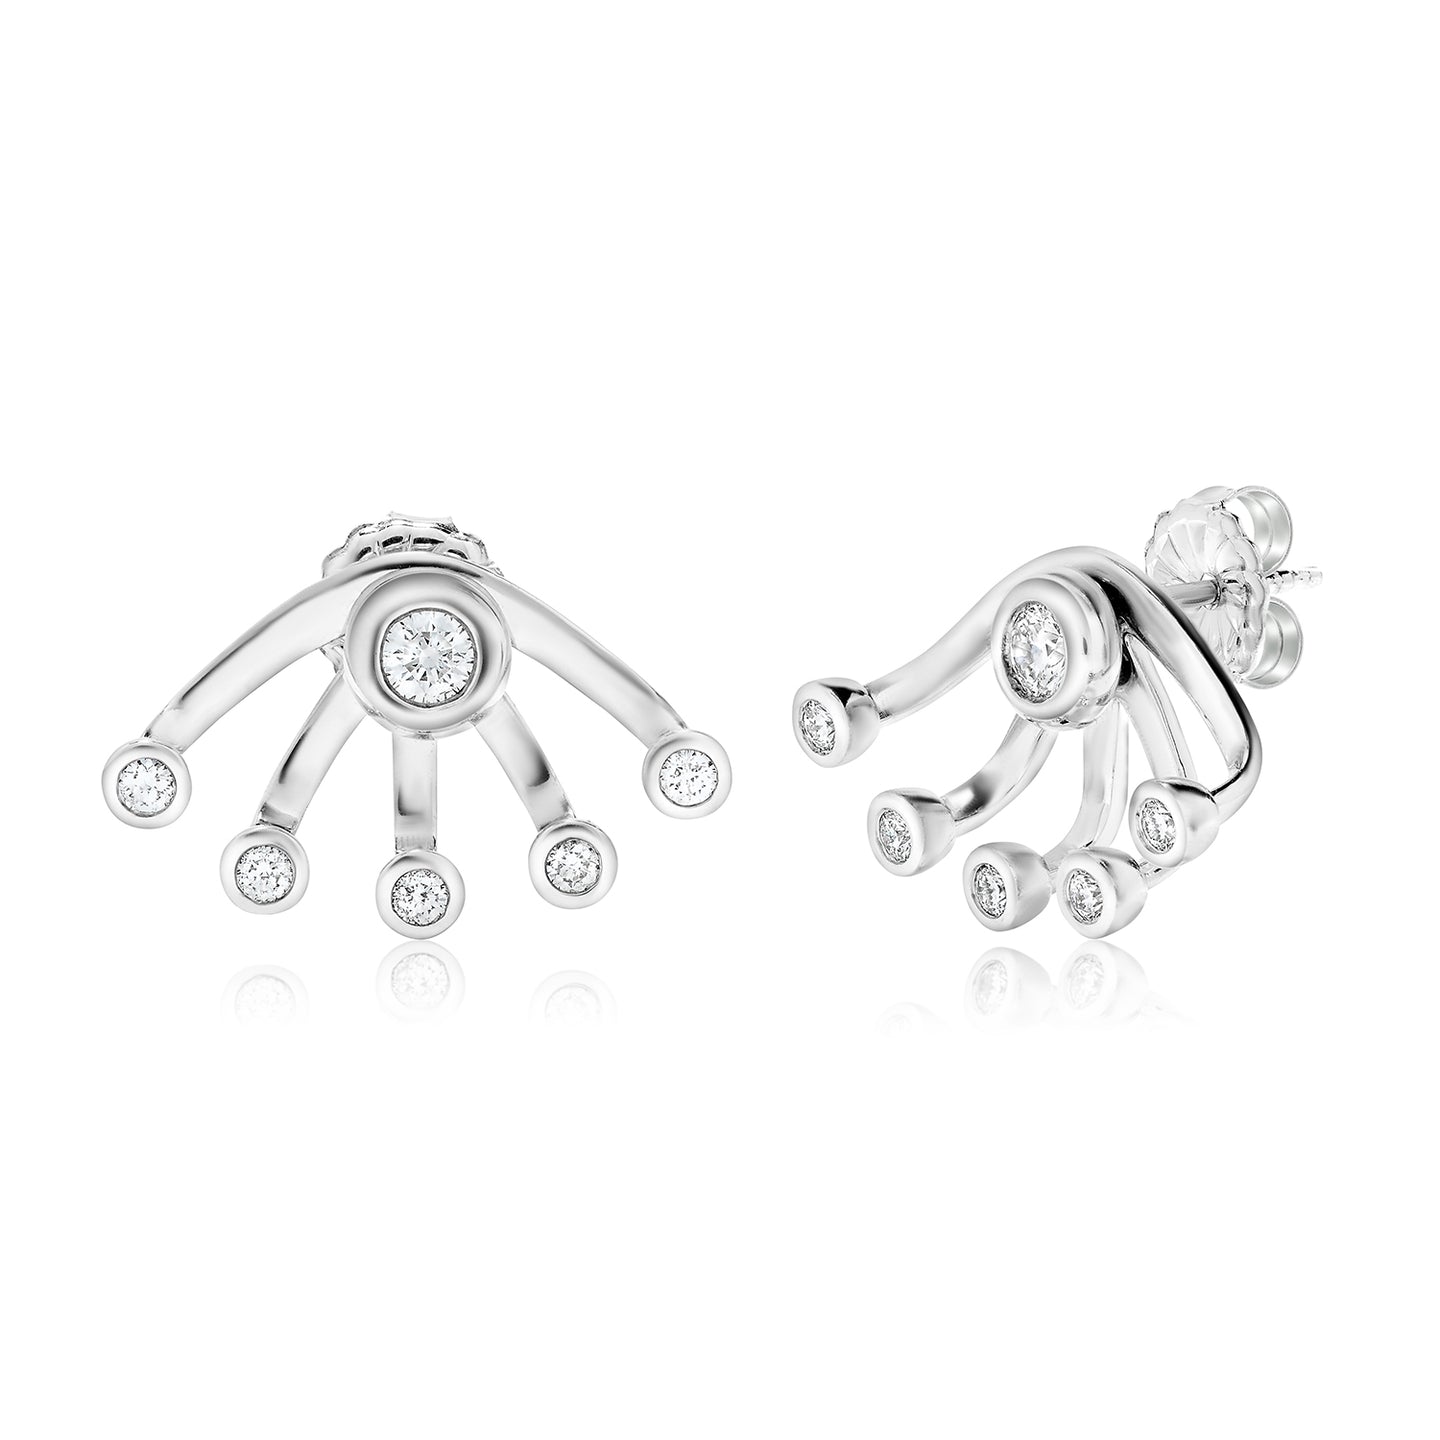 Sabel Collection 18K White Gold Bezel Stud and Wrap Earring Jacket Earrings